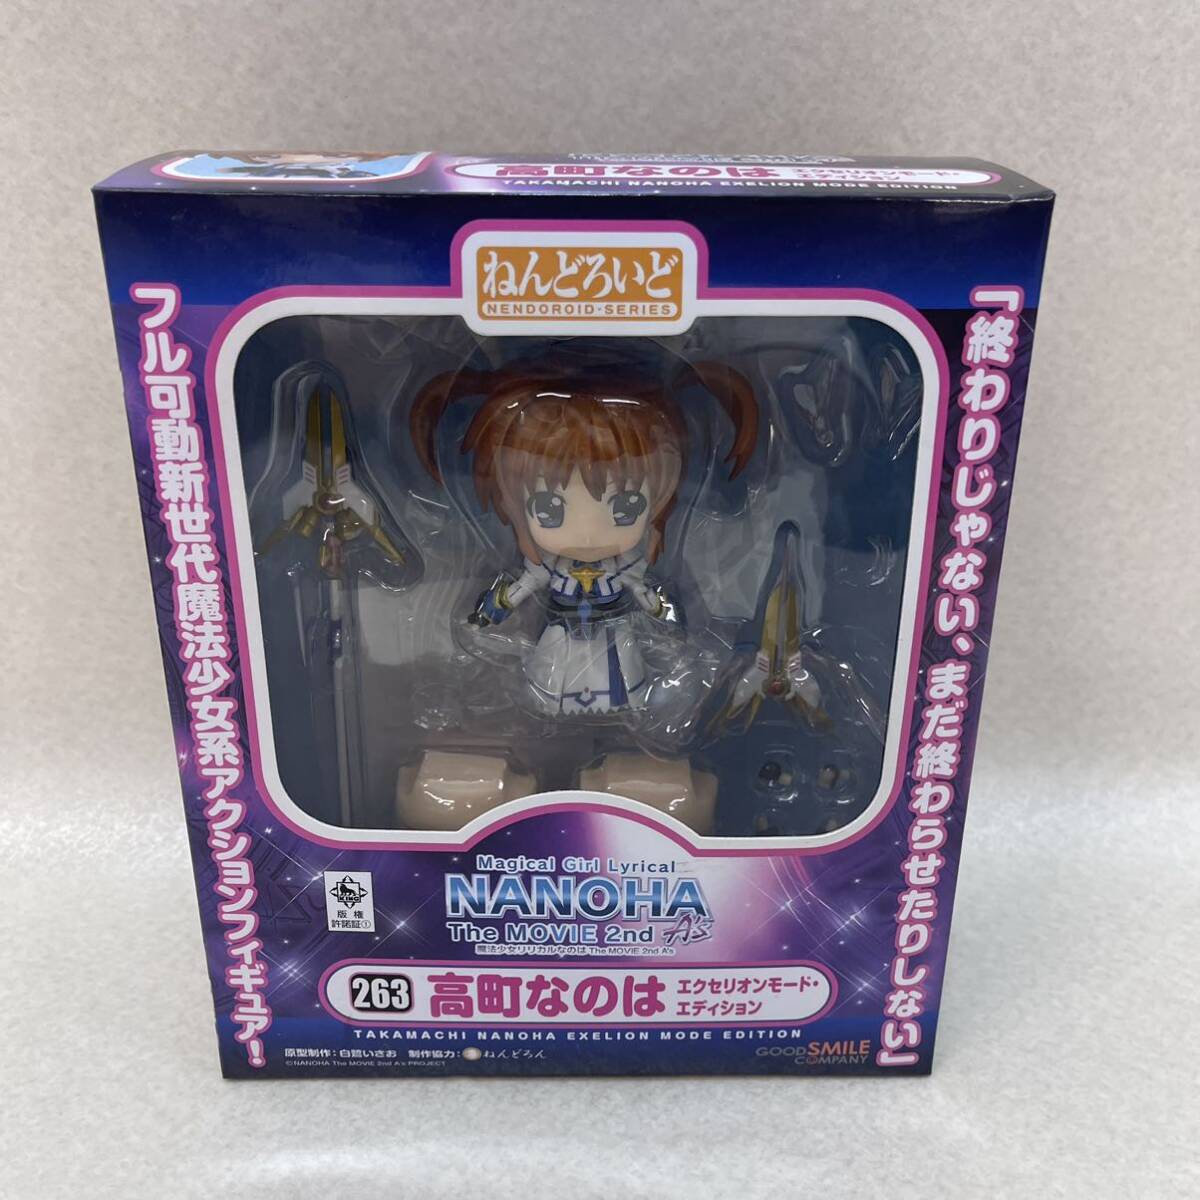 H2074* secondhand goods *......263 Magical Girl Lyrical Nanoha height block .. is ecse li on mode * edition including in a package un- possible 